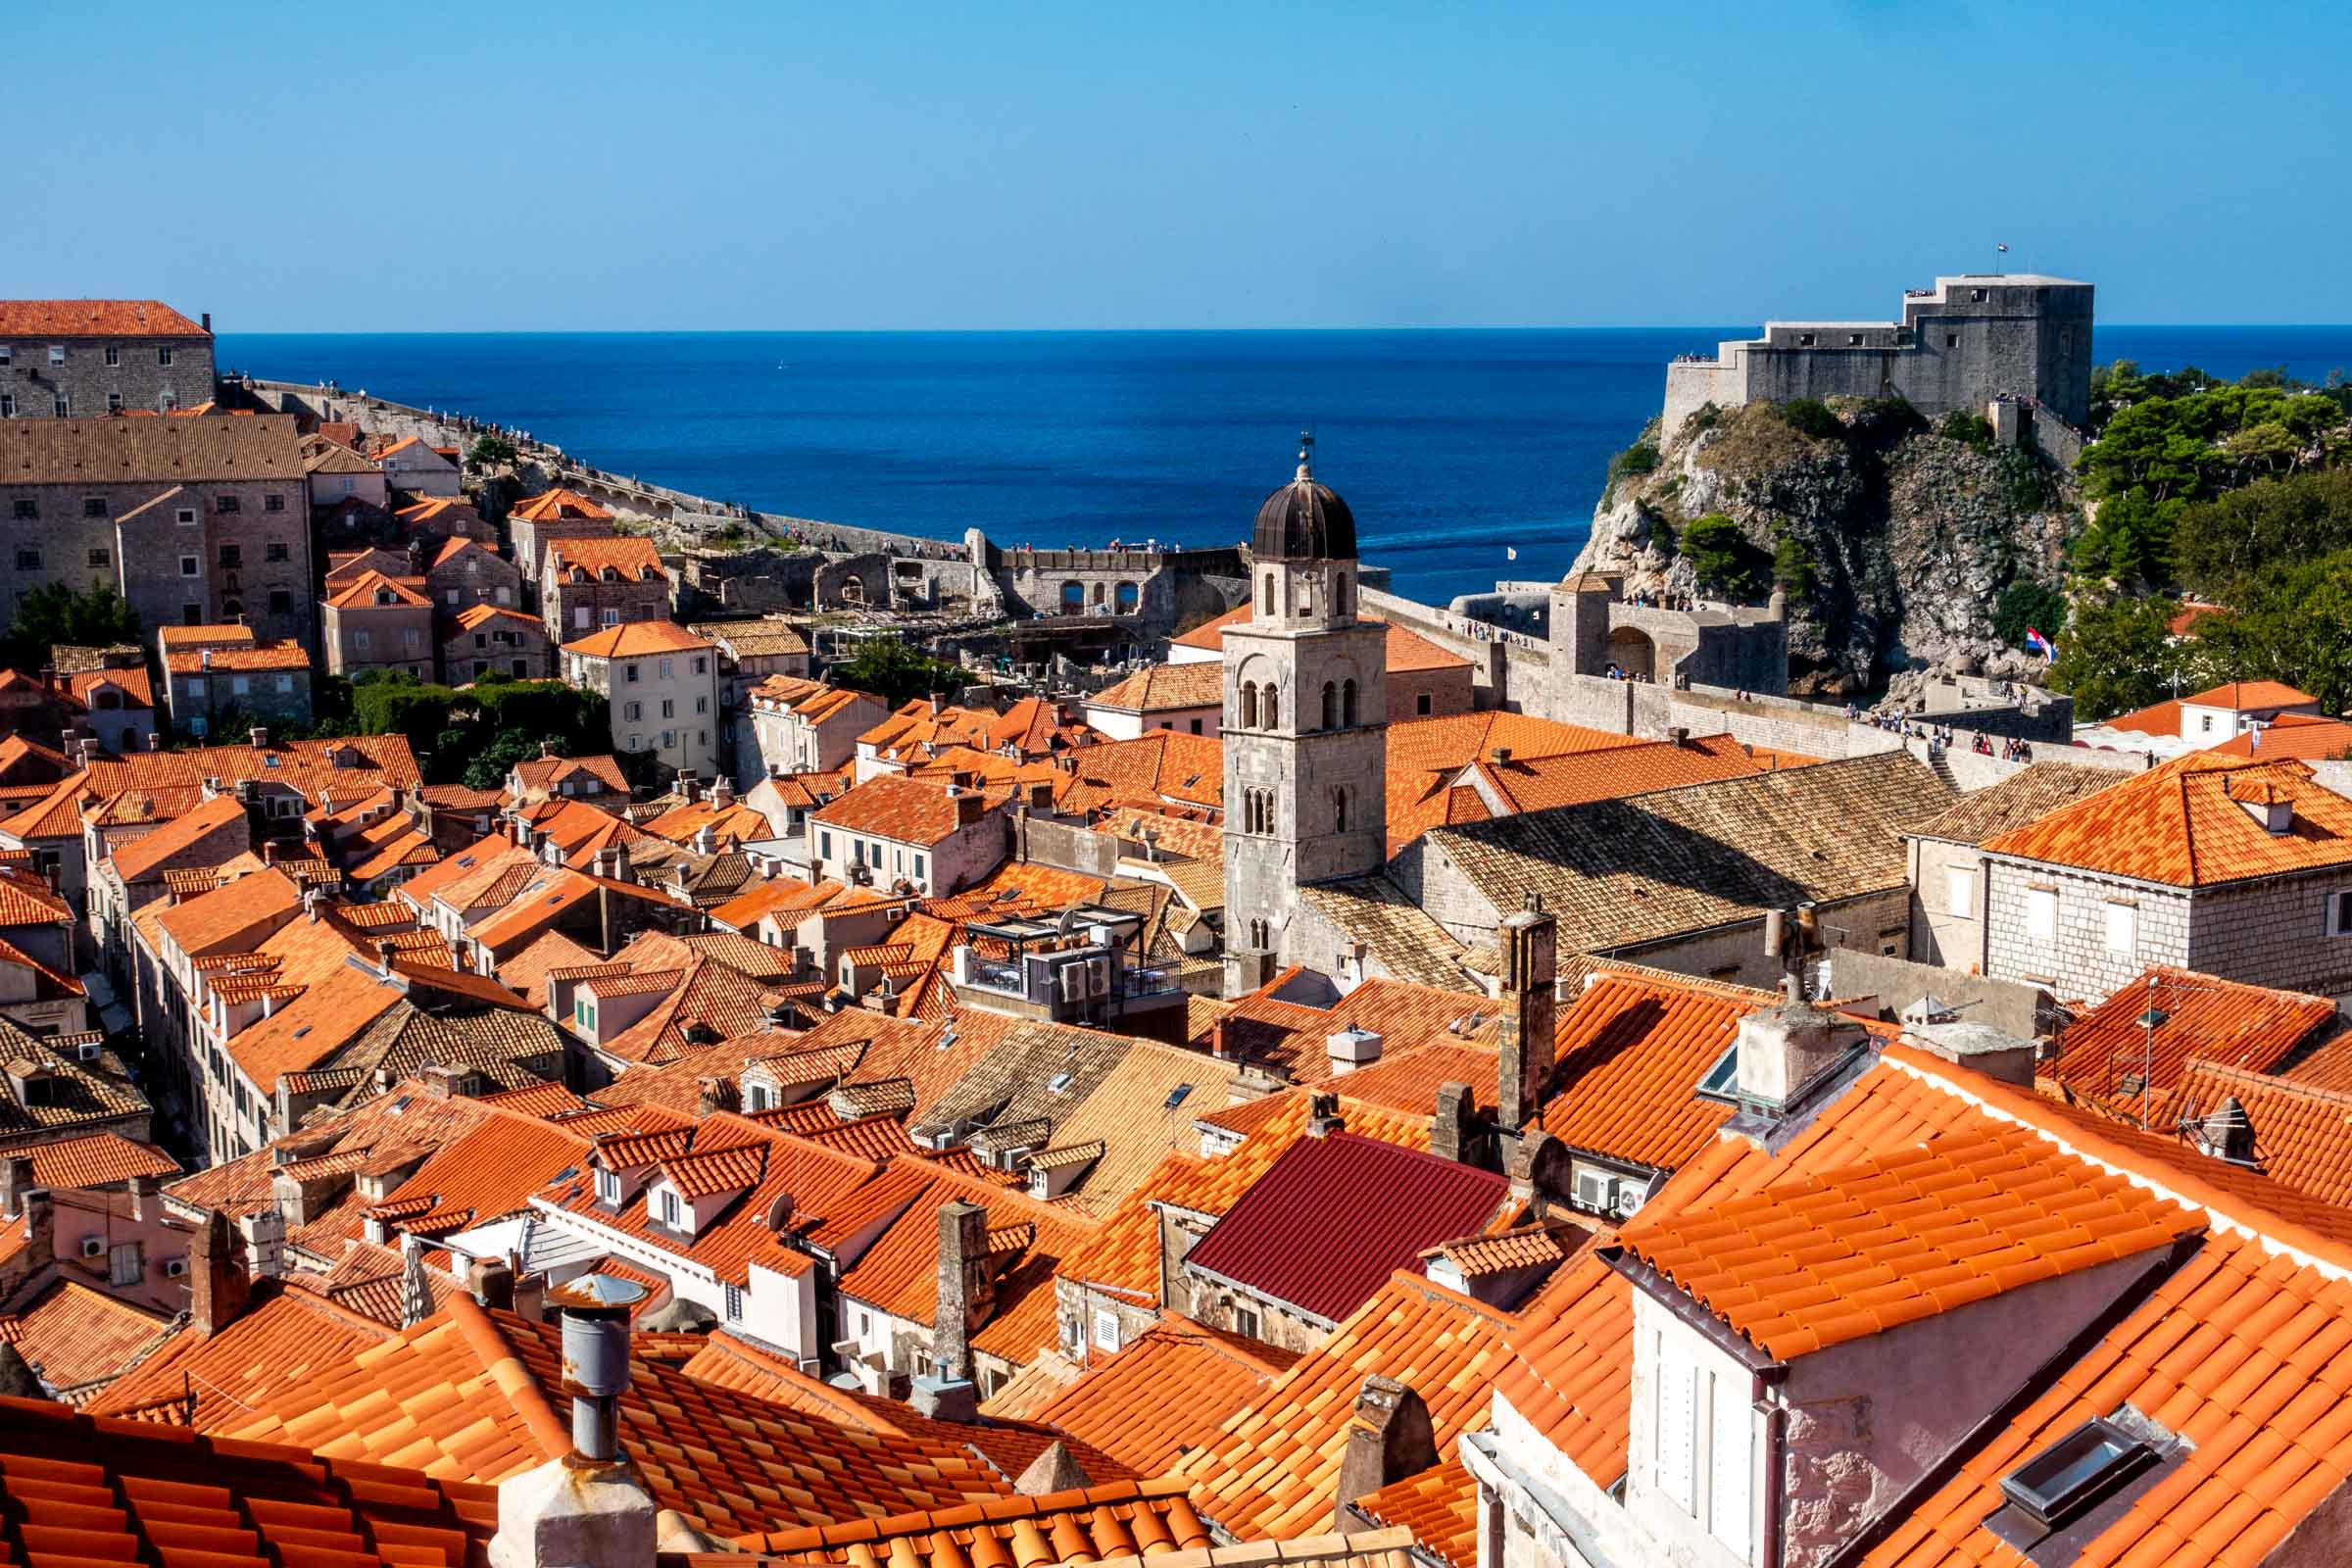 Red roofs of Dubrovnik, Croatia, with the ocean in the distance